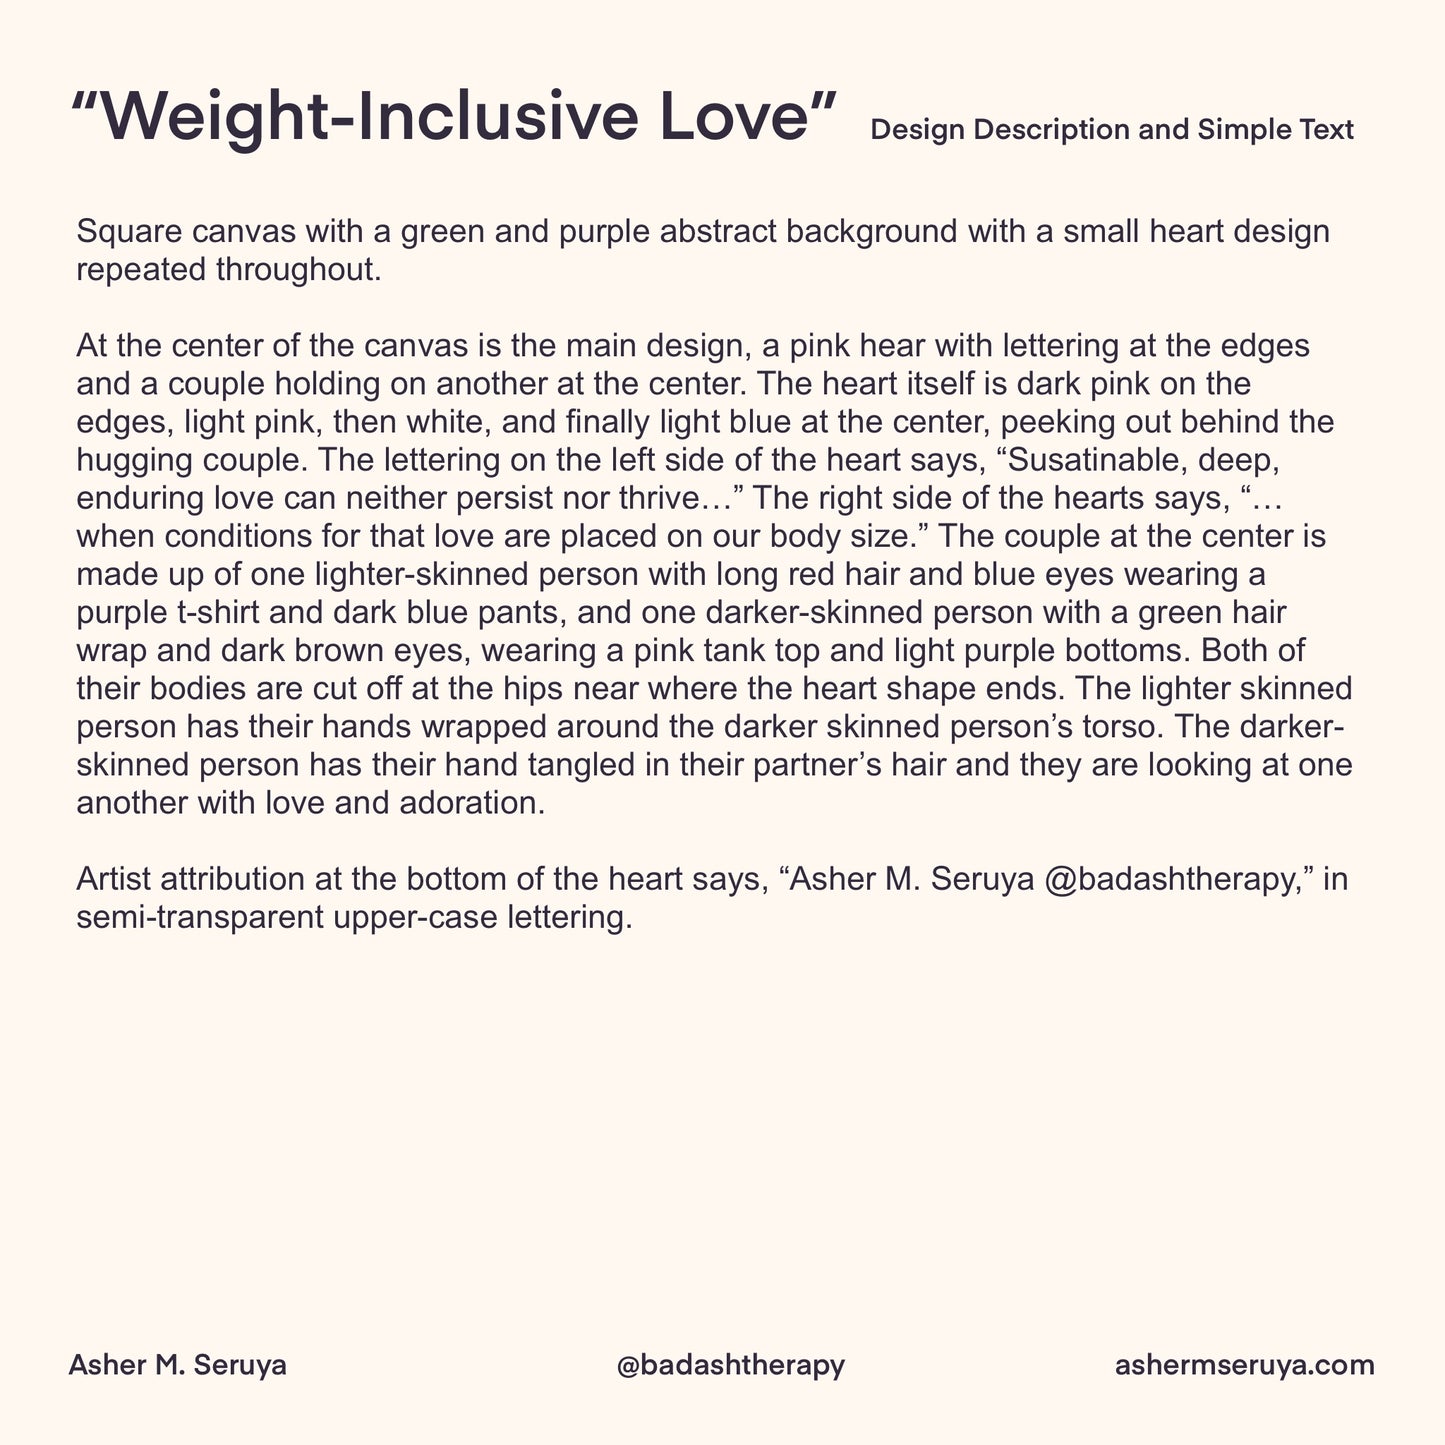 Weight-Inclusive Love